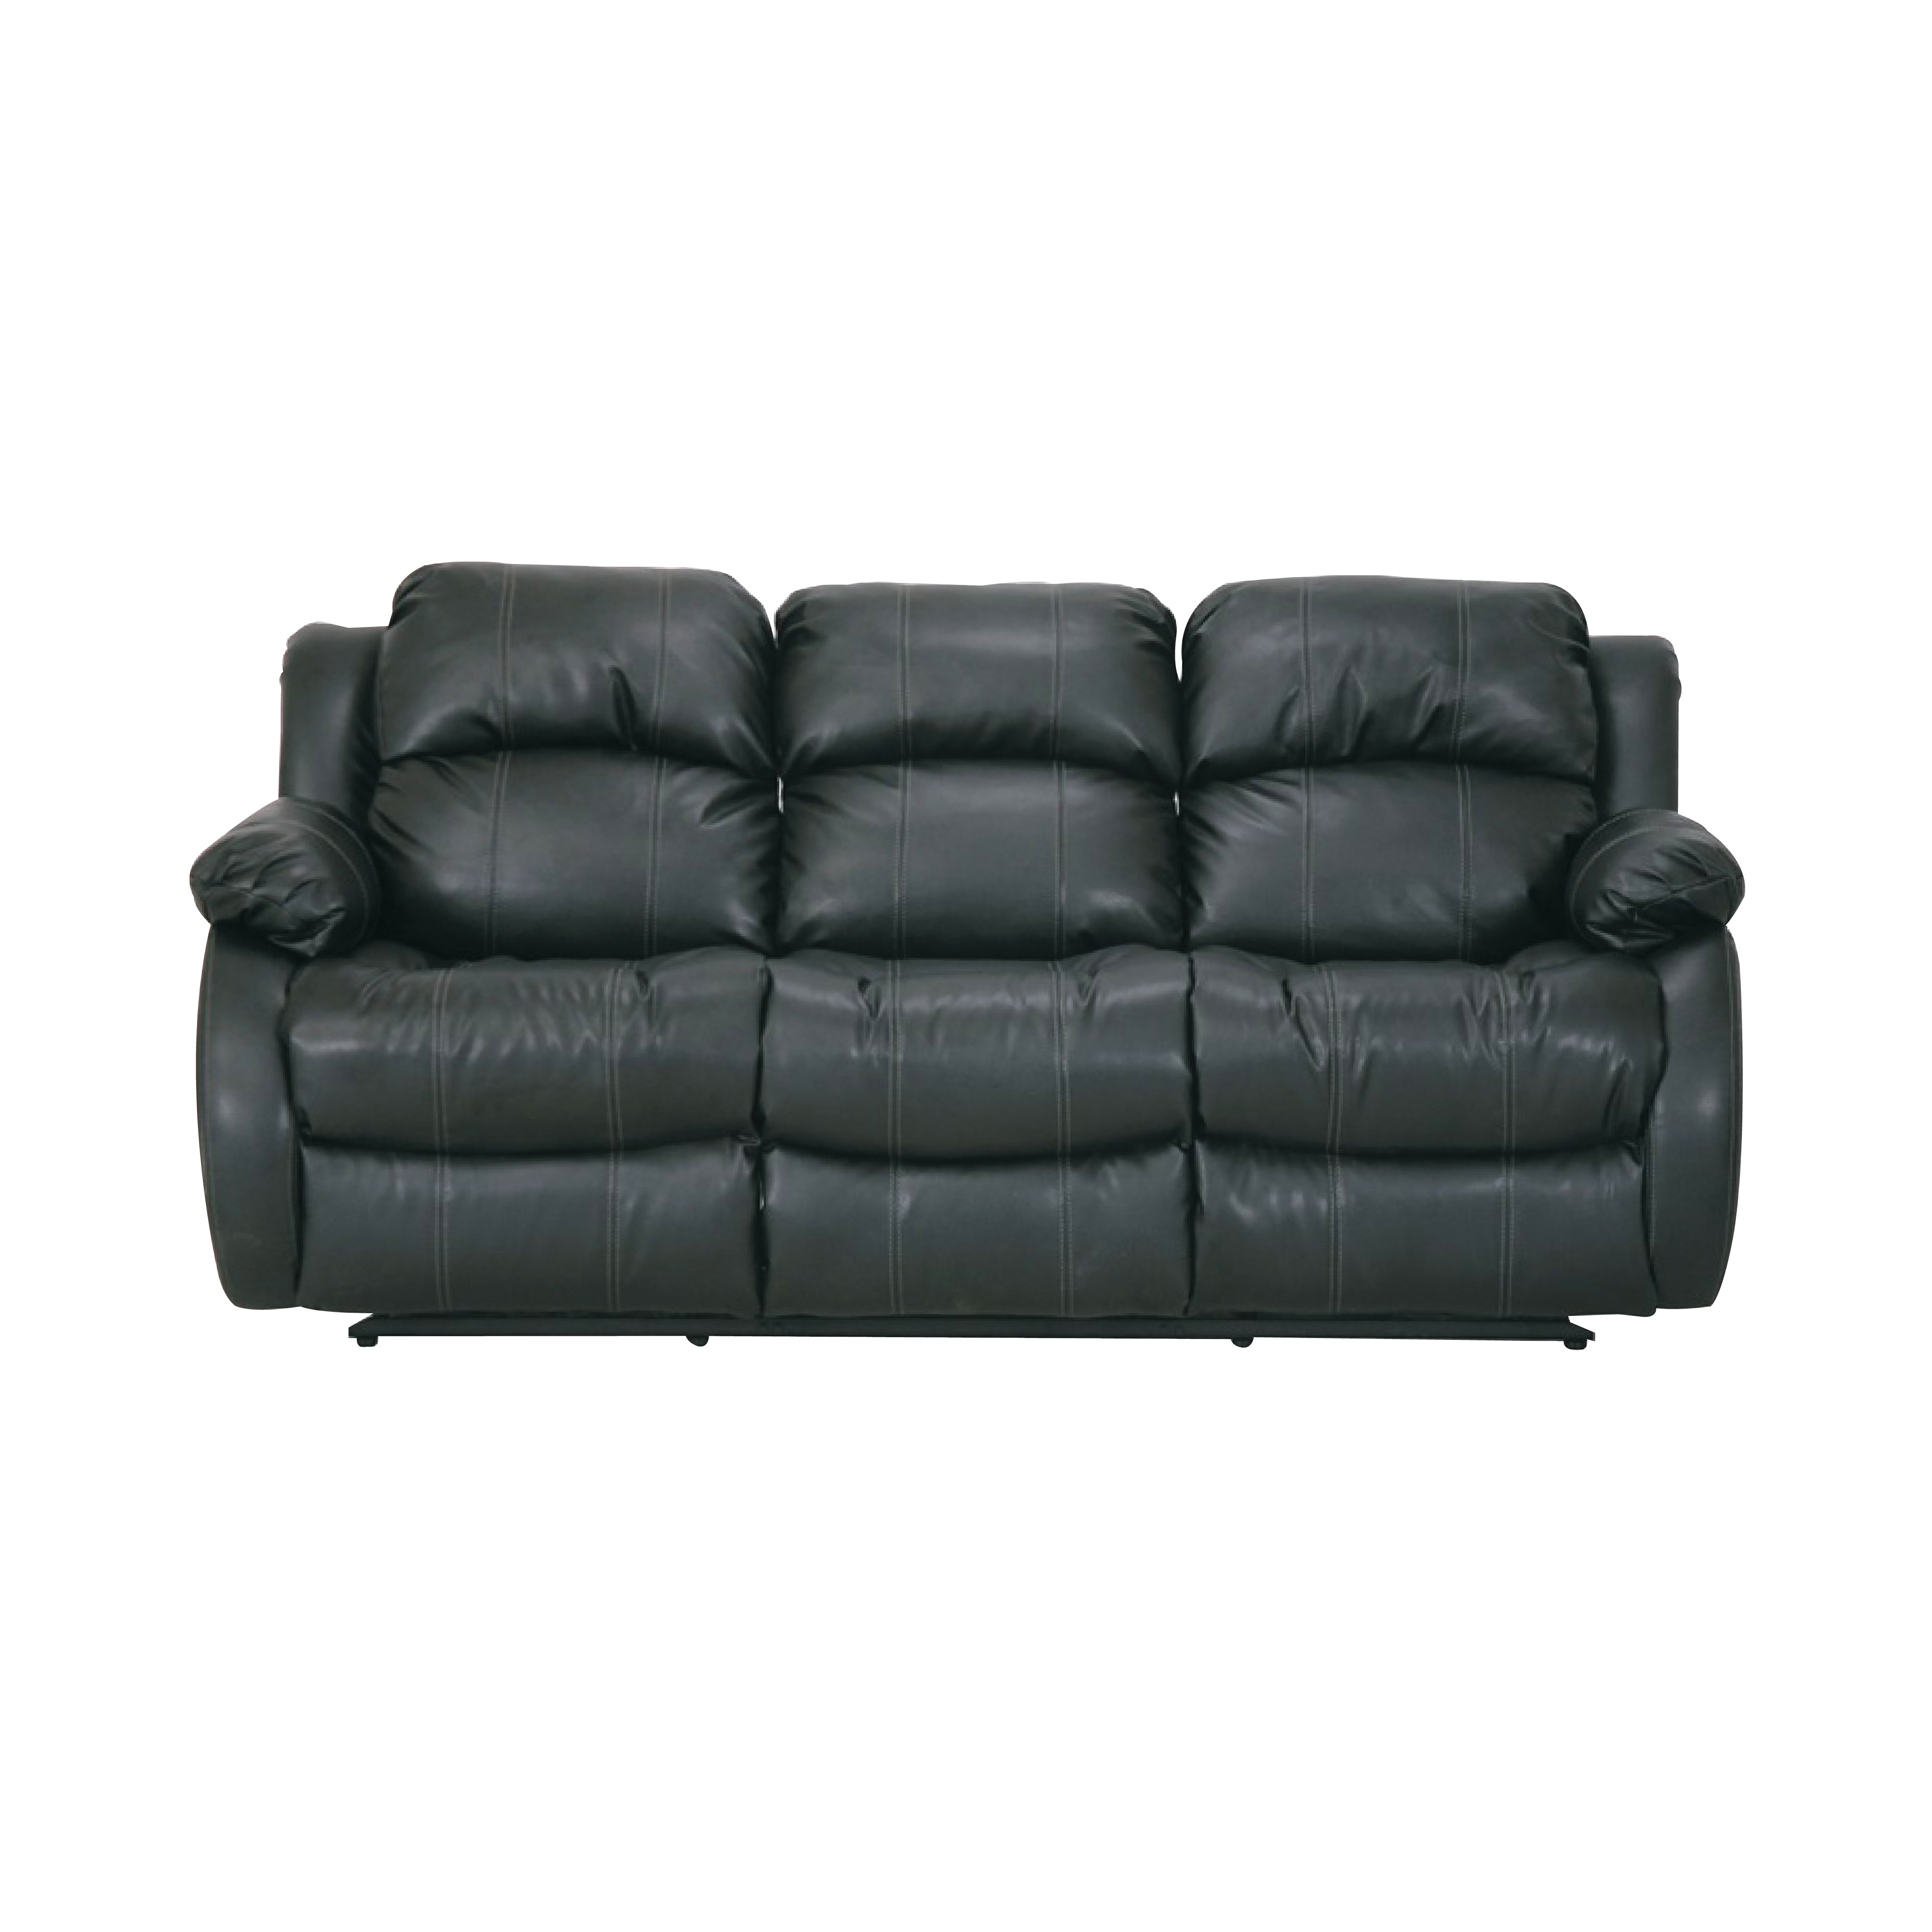 3 Seater Recliner Sofa In Fabric Golf